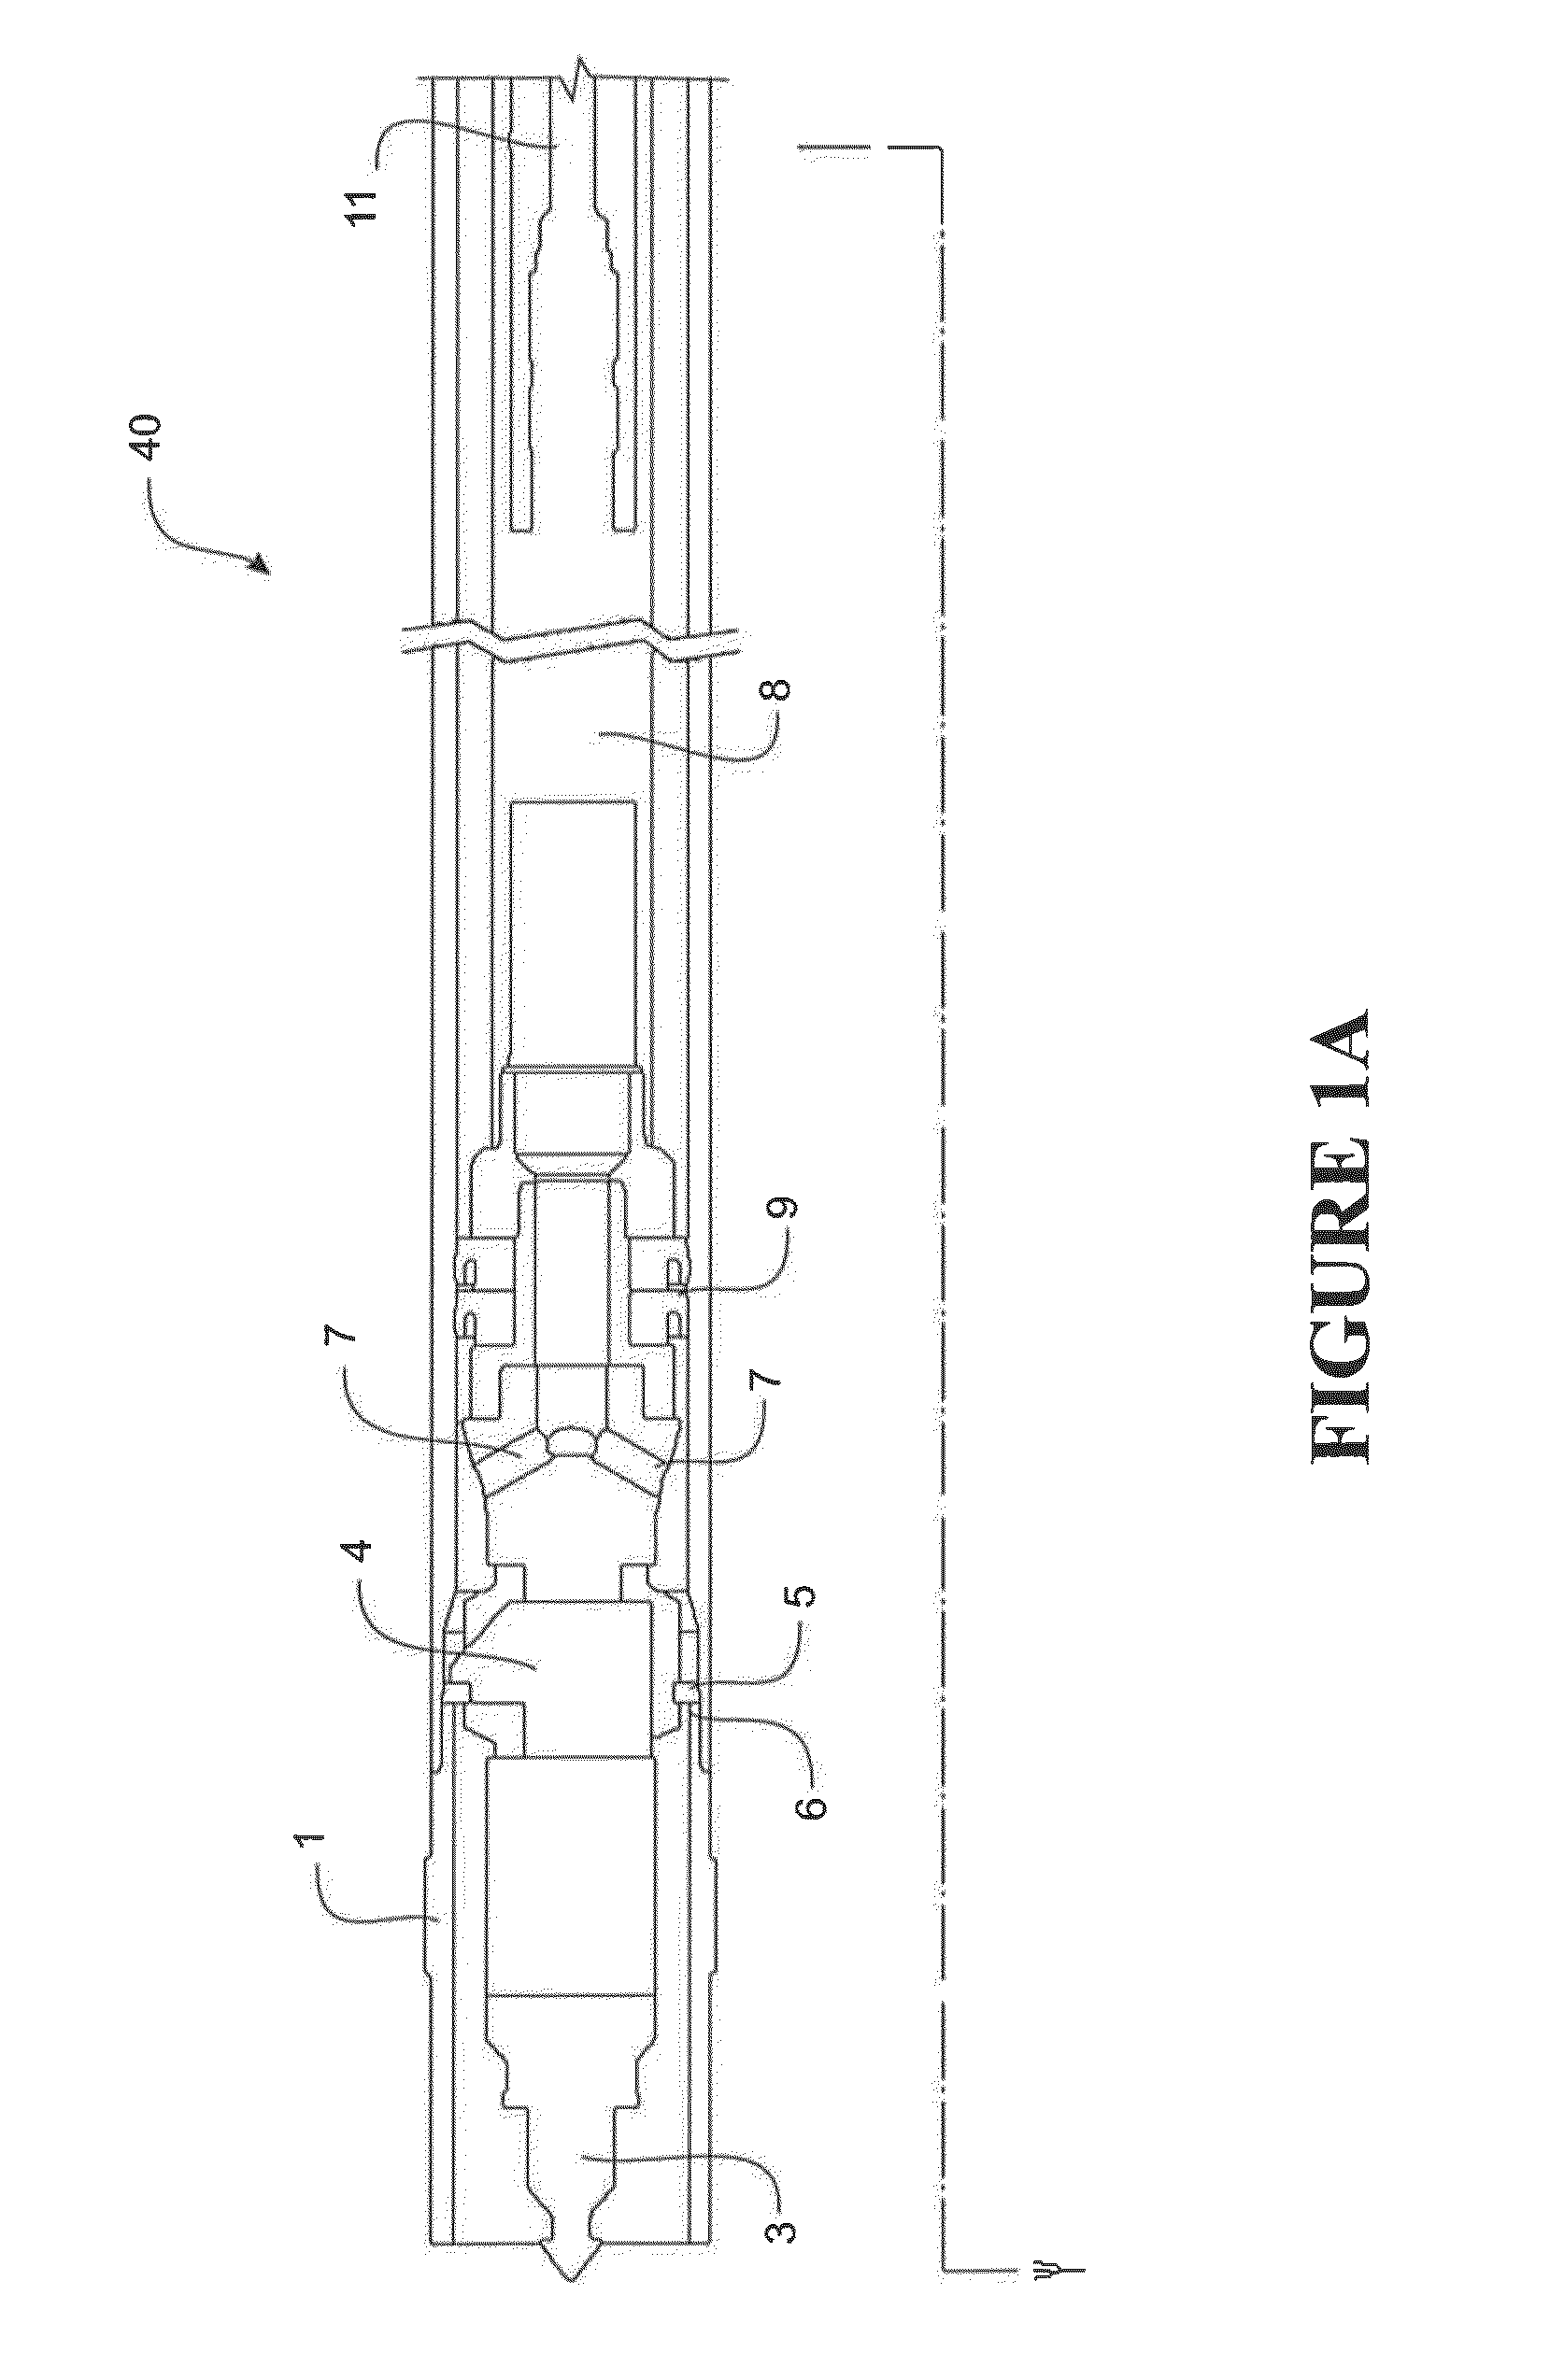 Seated hammer apparatus for core sampling